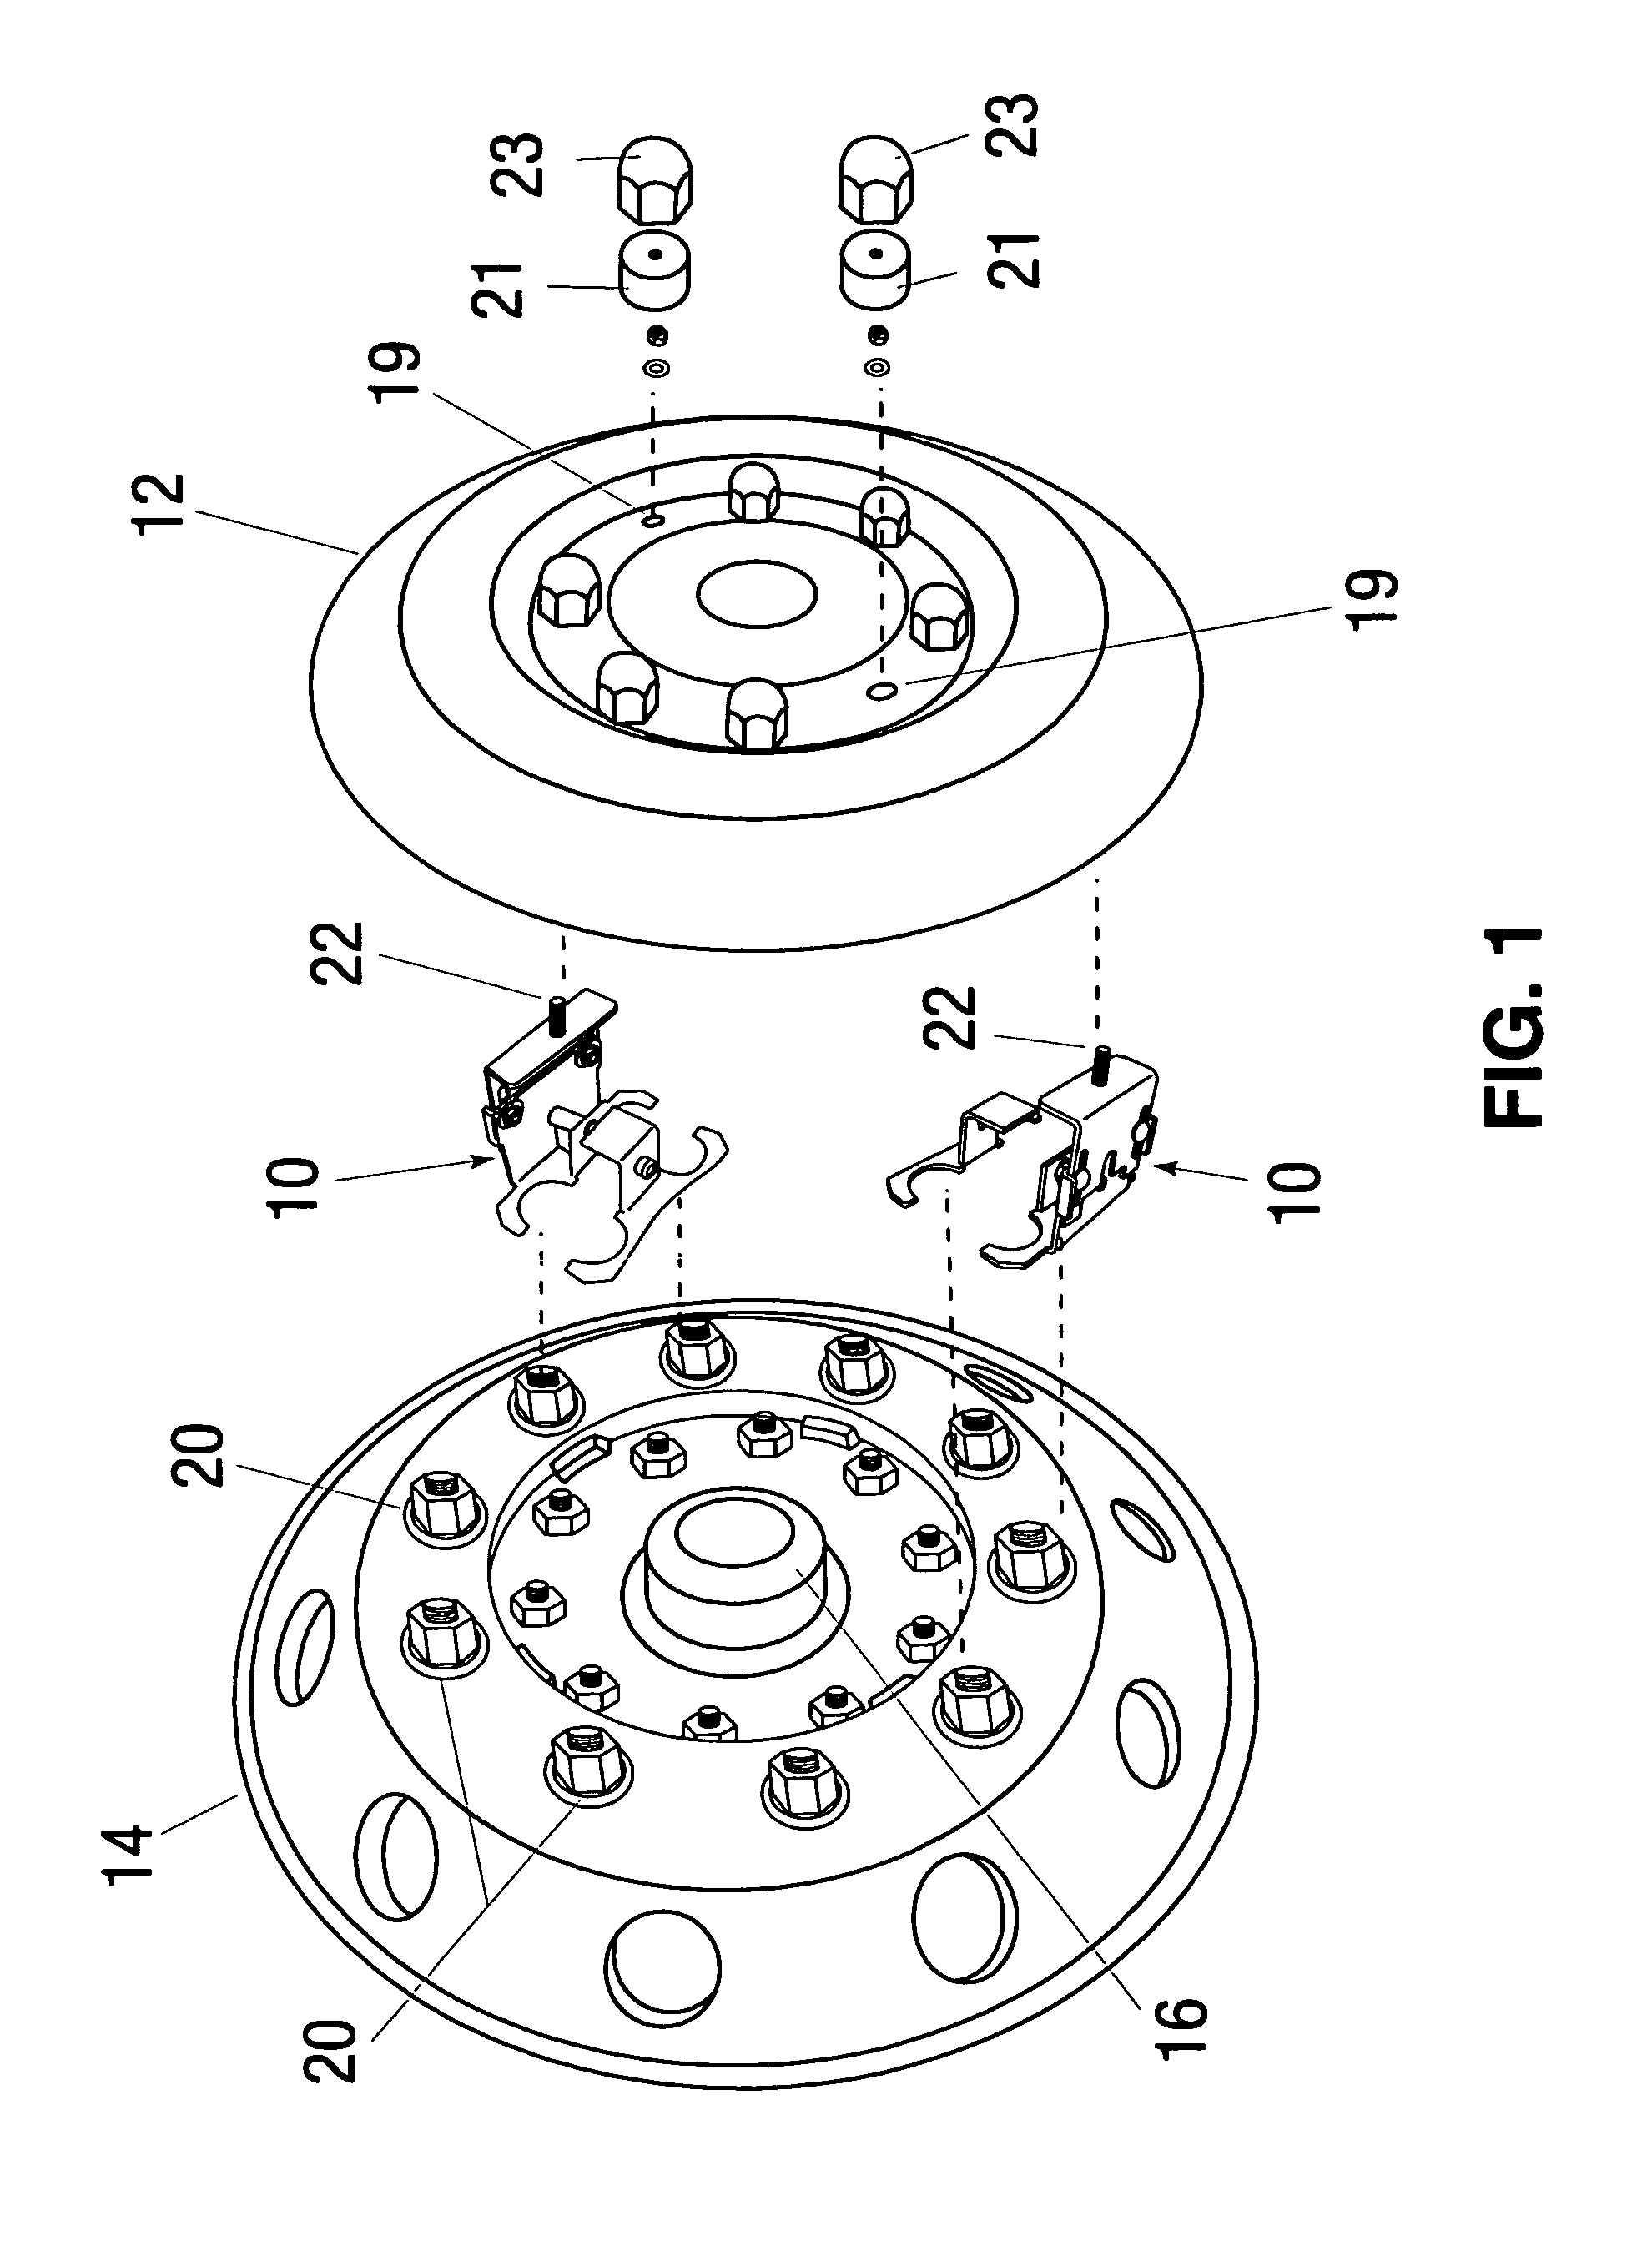 Attachment for retaining a cover to the wheel of a truck